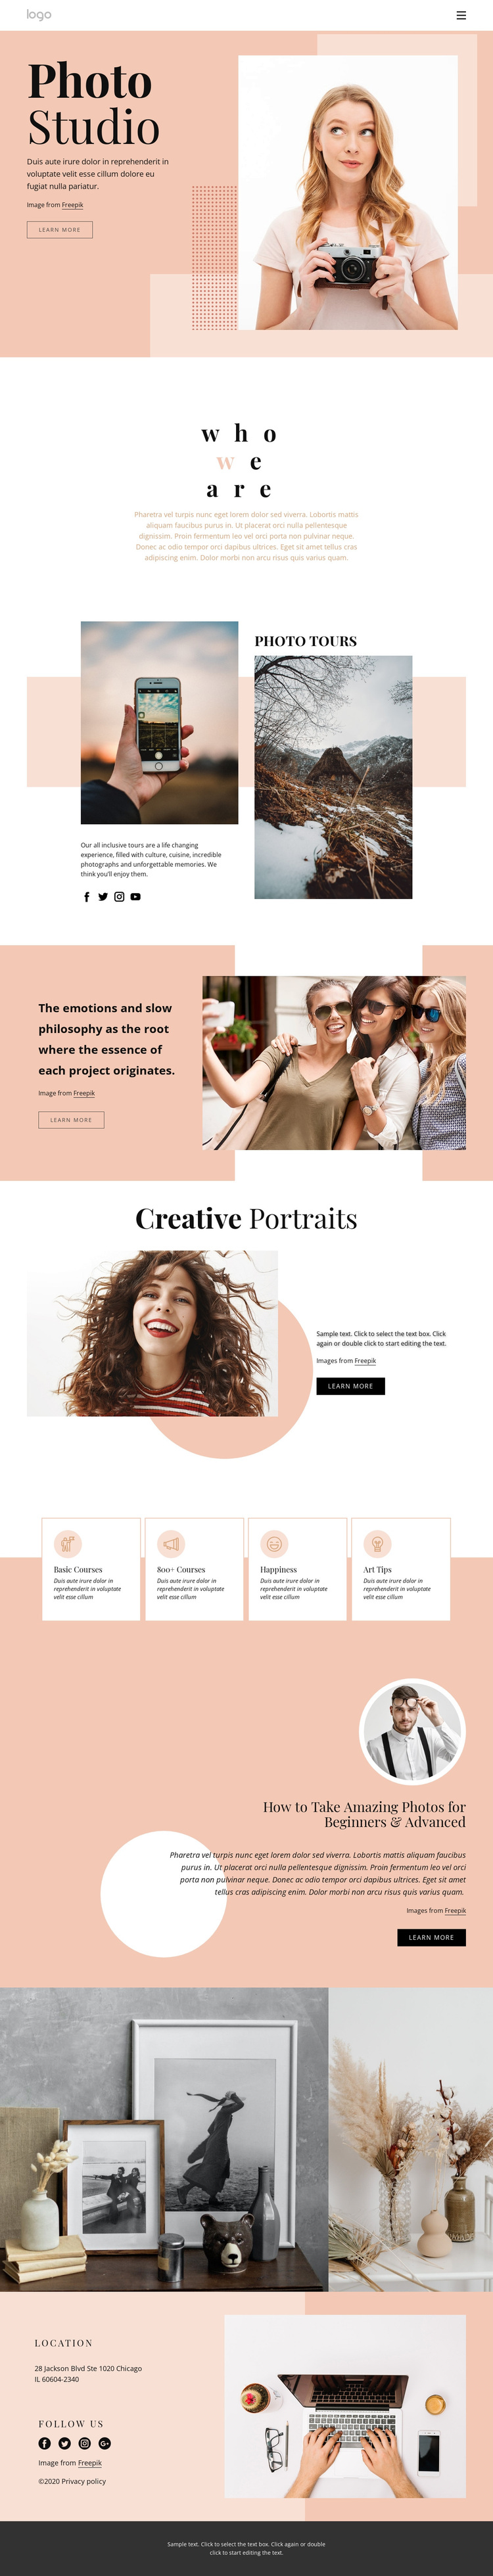 Photography courses Joomla Page Builder